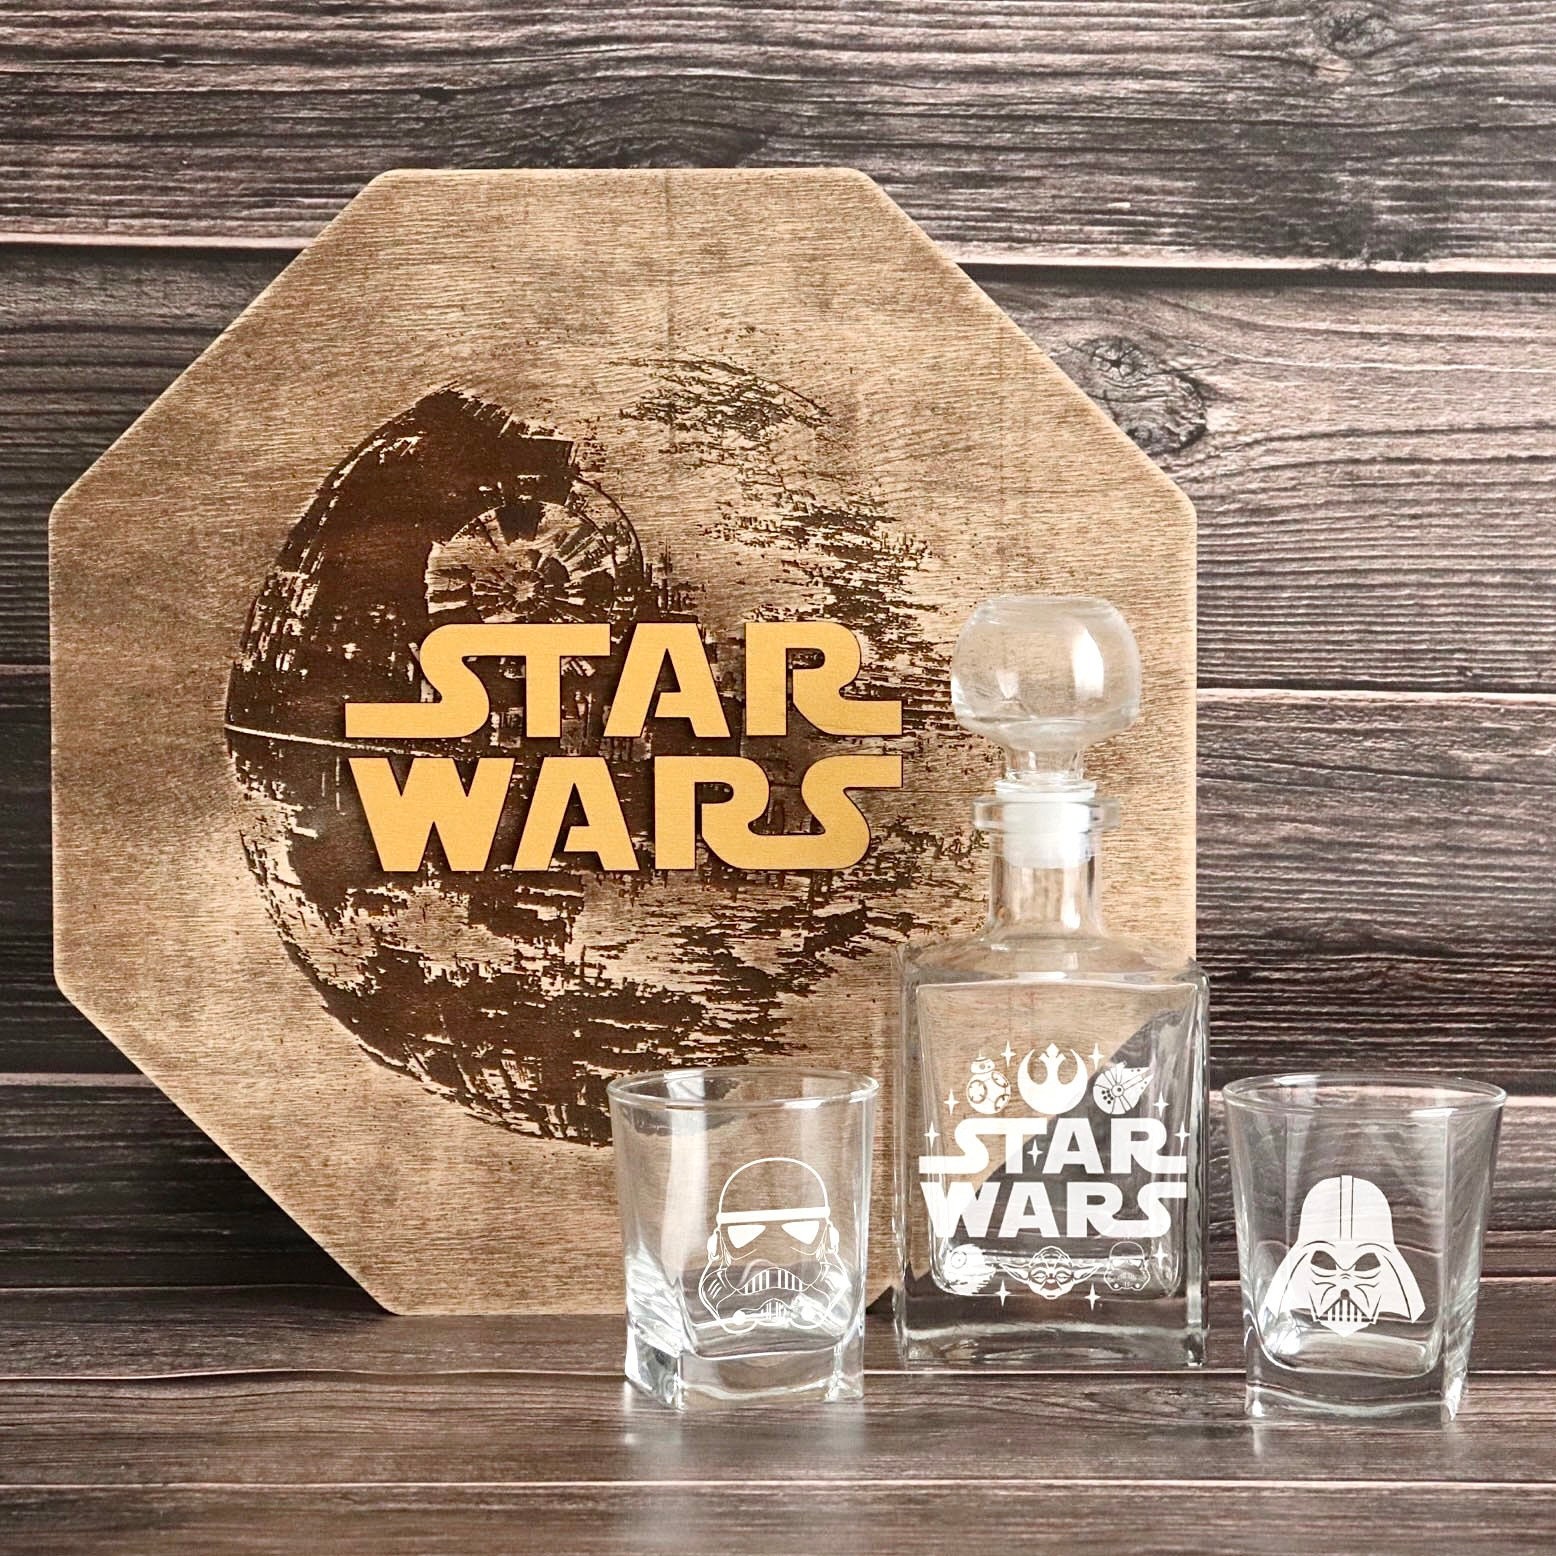 Star Wars Death Star Etched Two Bourbon Whiskey Rocks Glasses 8 oz each